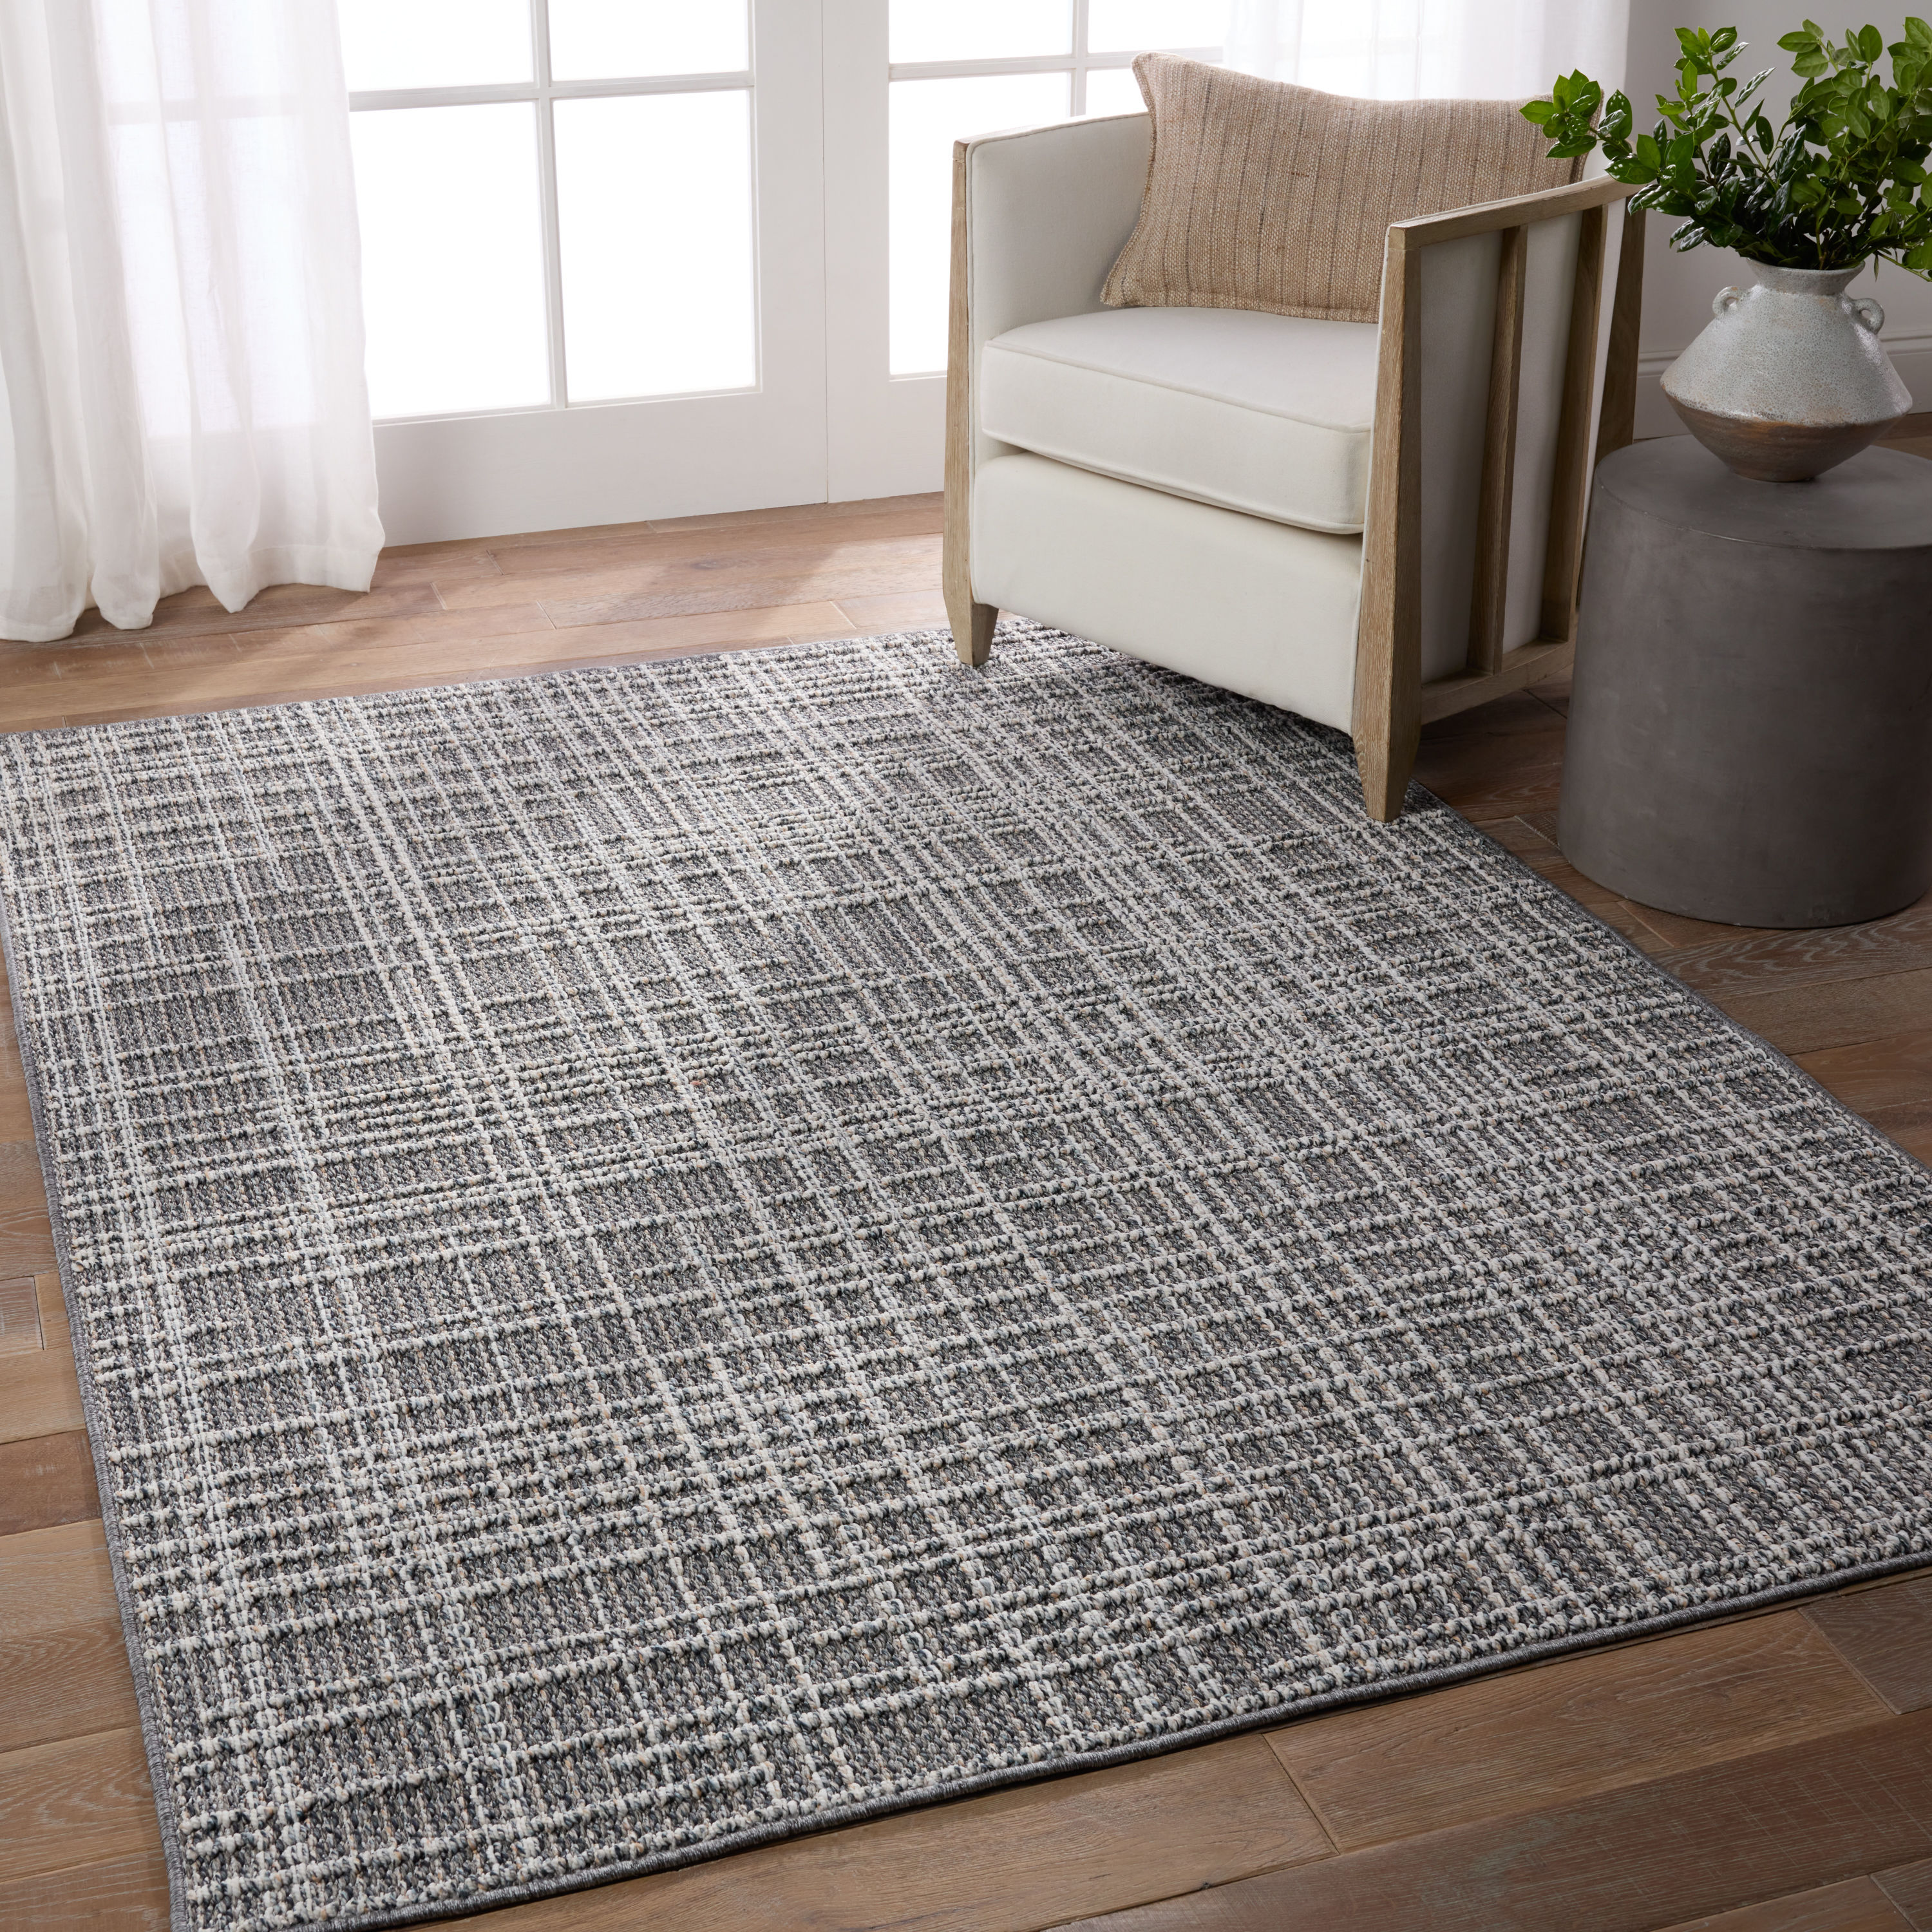 Indoor/outdoor Rugs 5x7 Stripped Pattern Gray Outdoor Carpet Bohemian Style  Lasts Long Under Sunlight-grey Ivory 